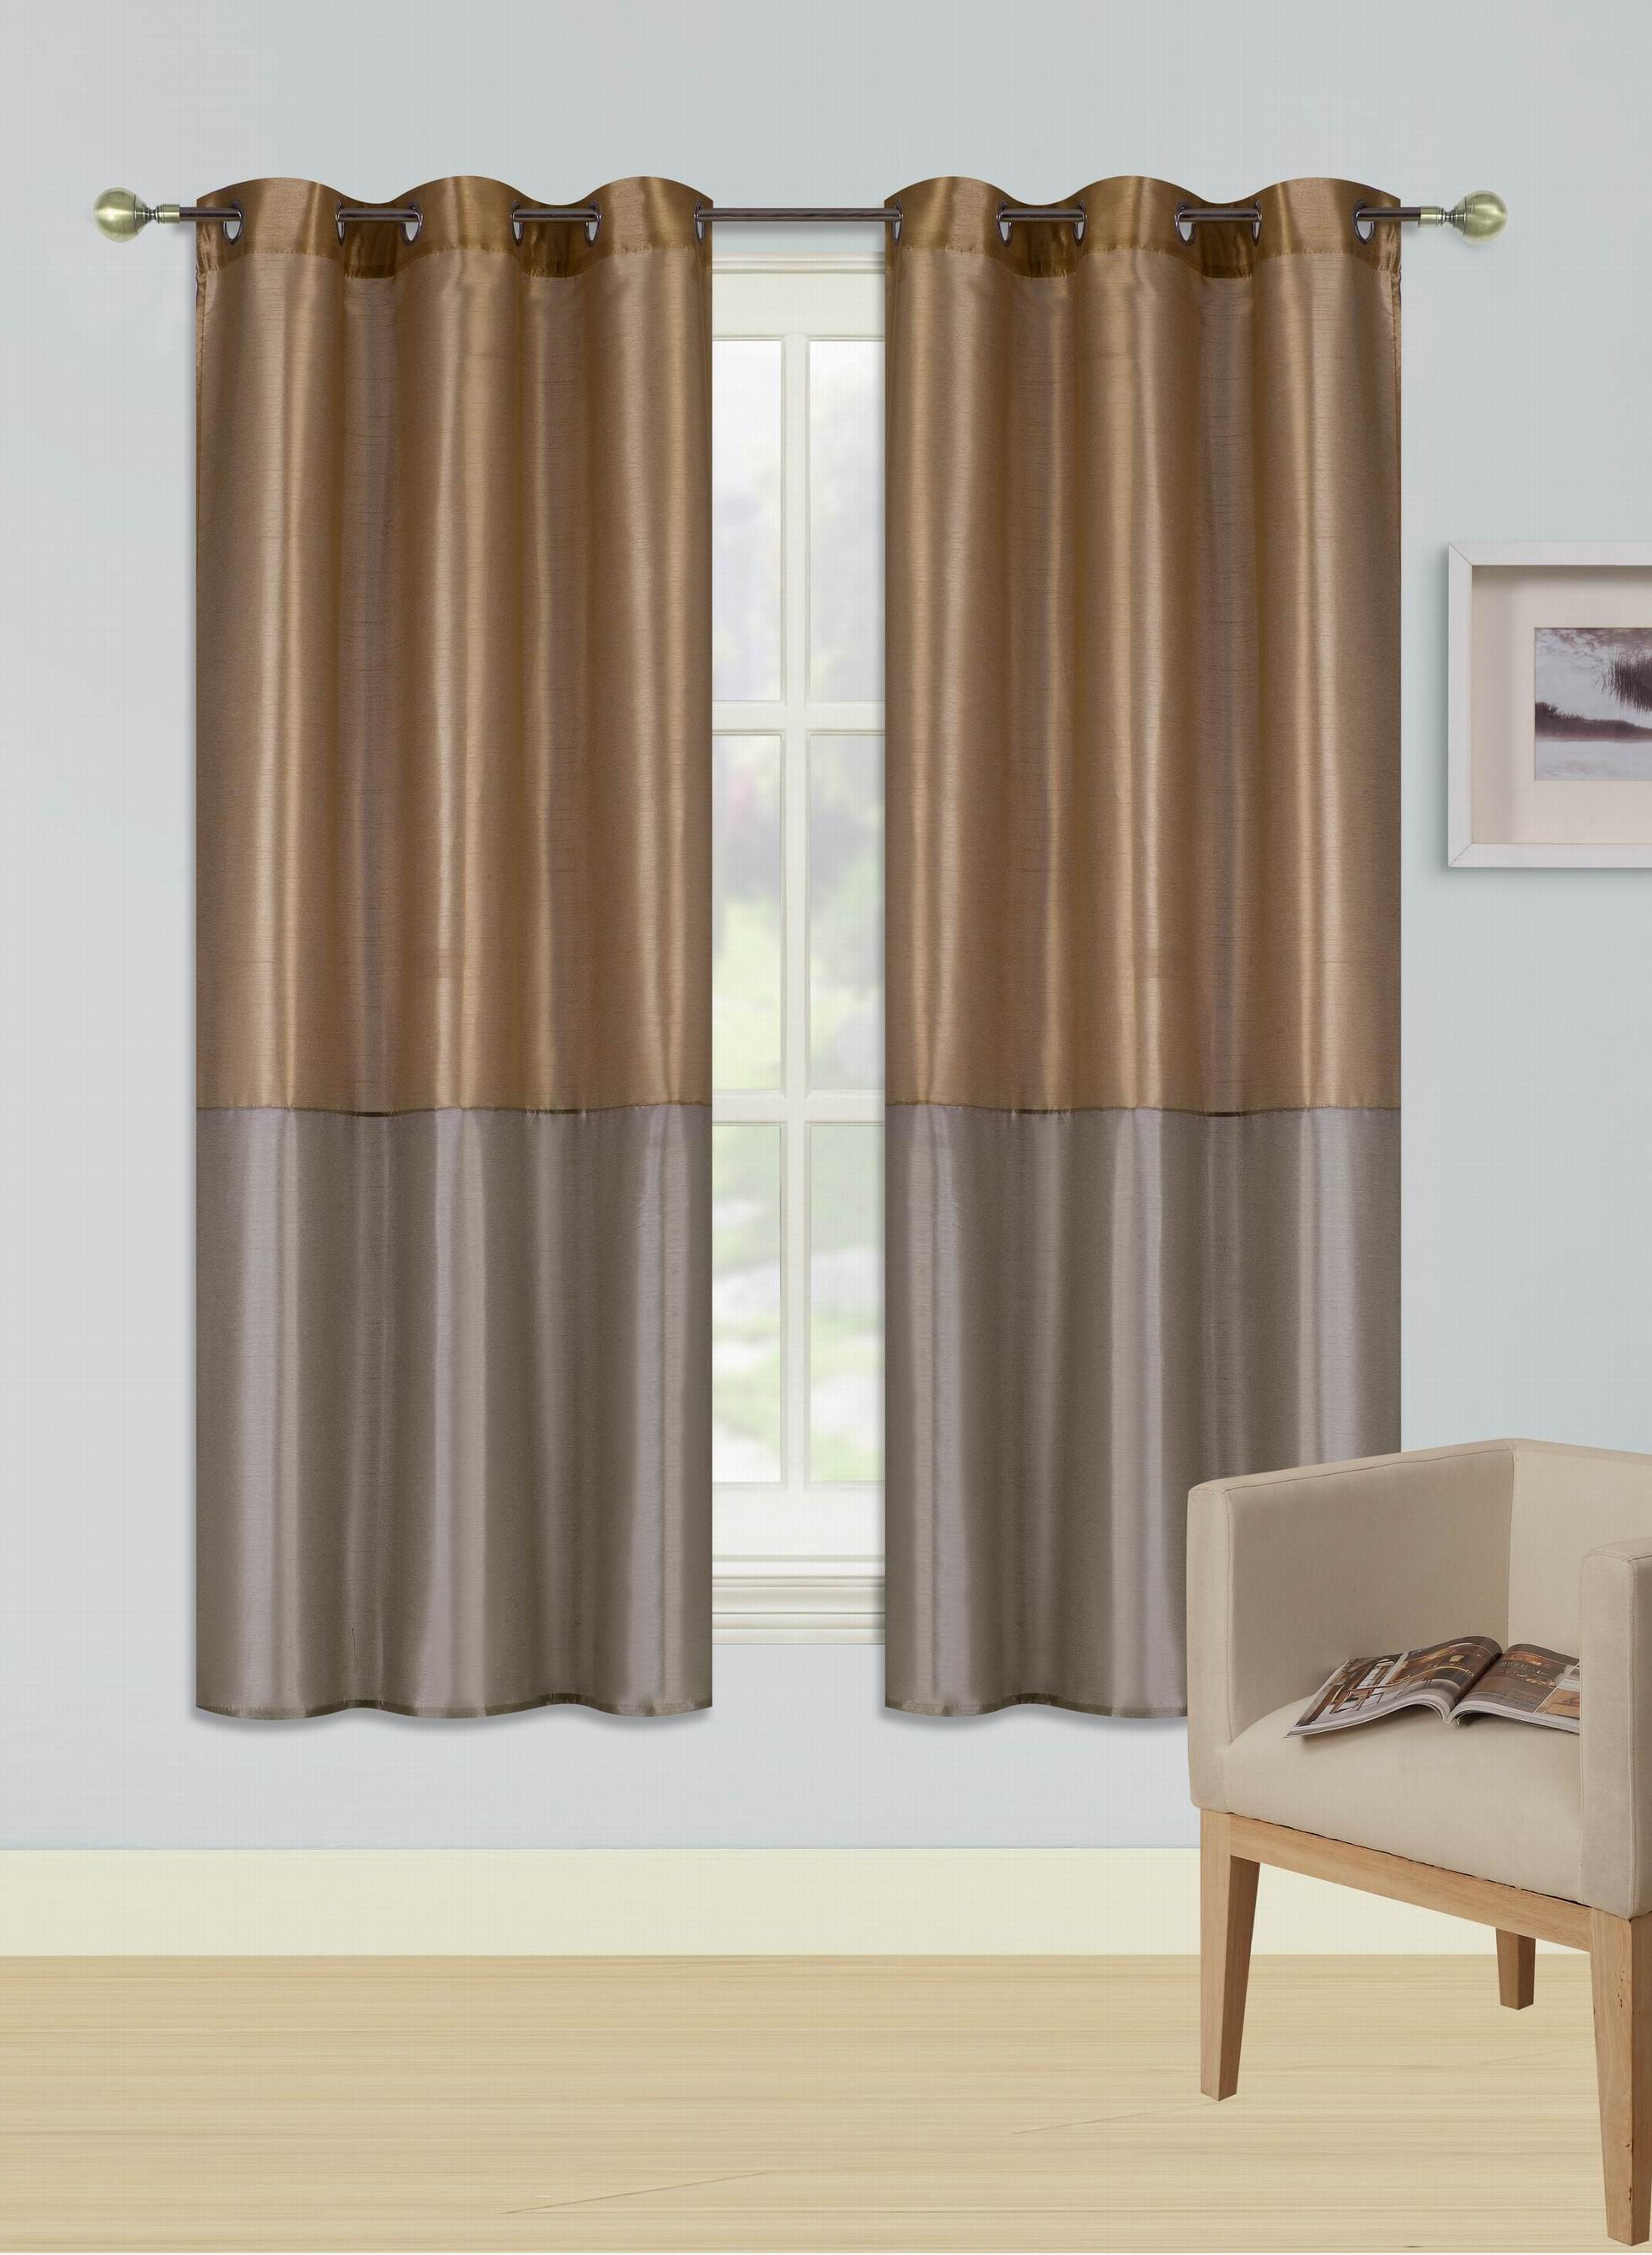 EID BLACK TAUPE Insulated Lined Blackout Grommet Window Curtain Panel PAIR 